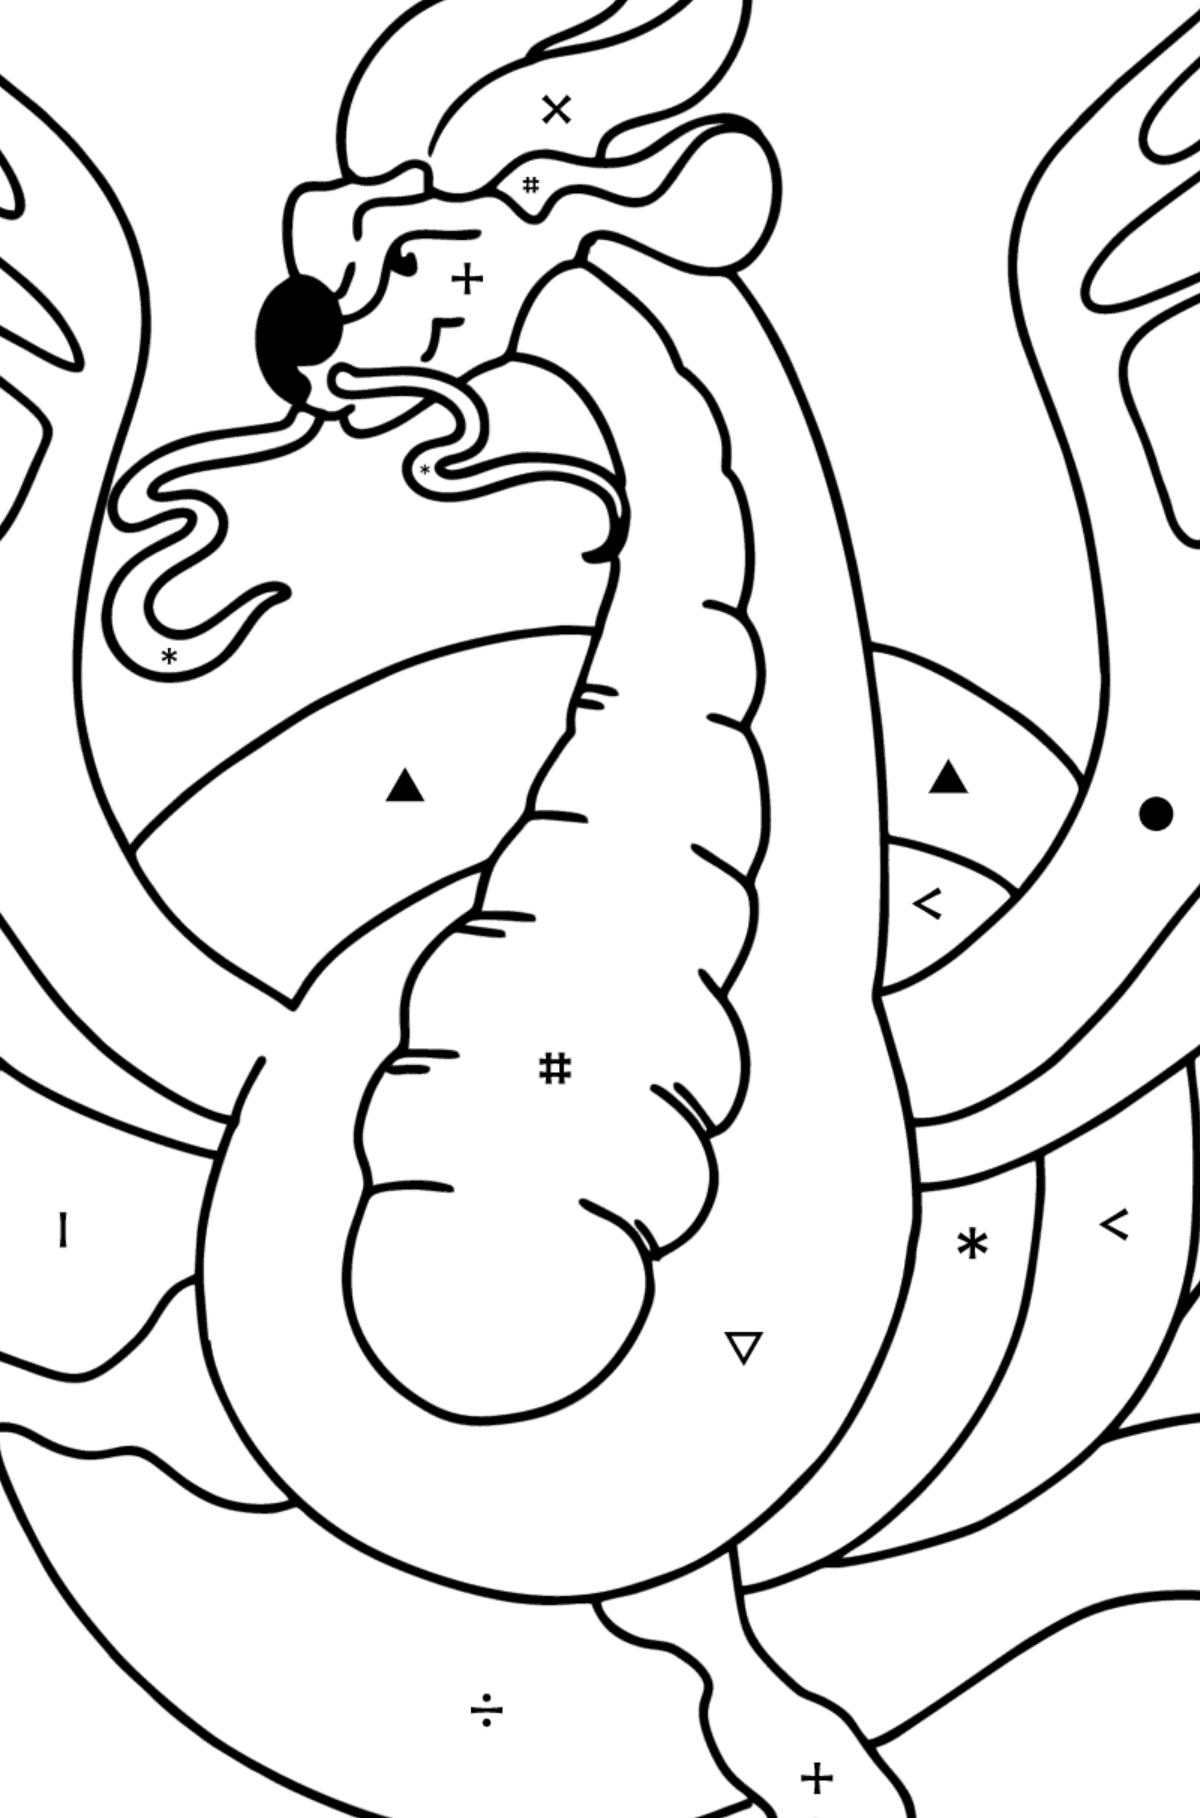 Dangerous Dragon coloring page - Coloring by Symbols for Kids